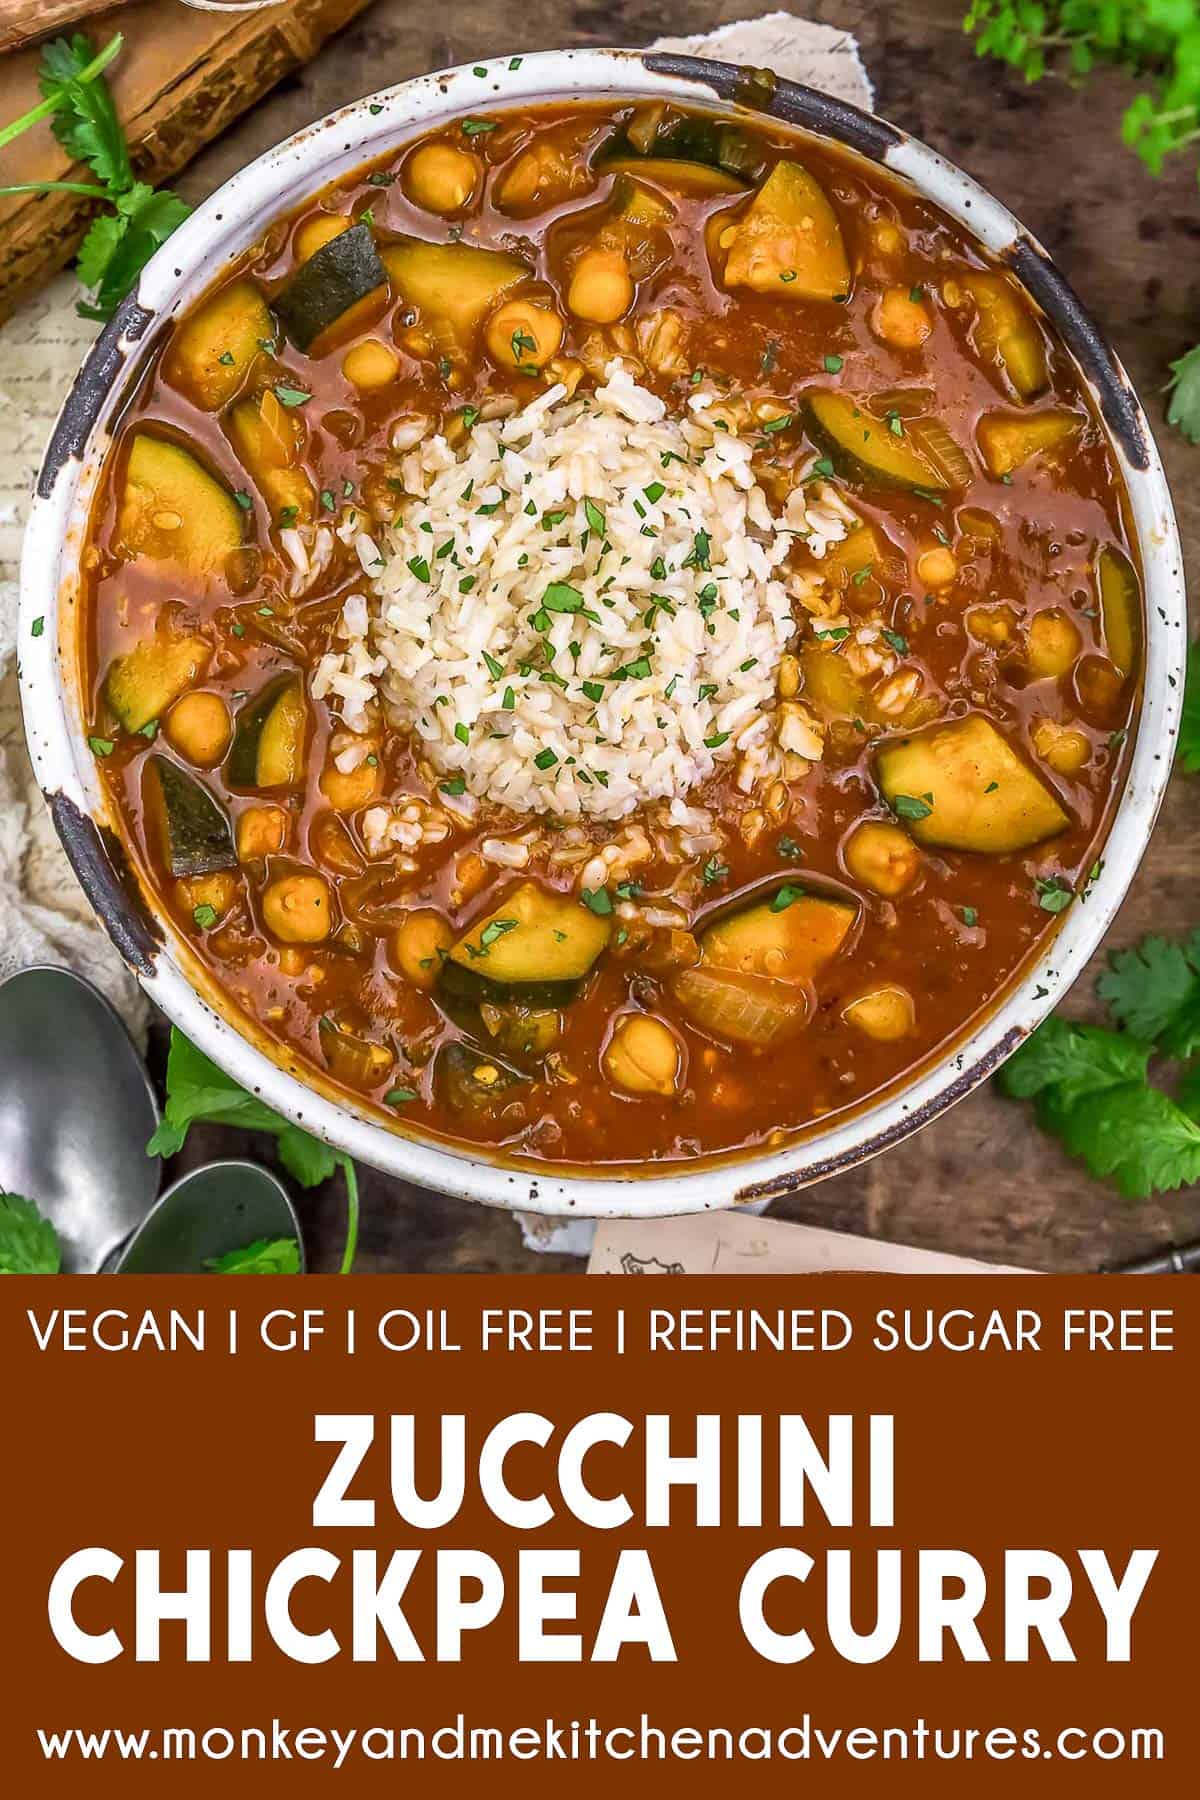 Zucchini Chickpea Curry with text description